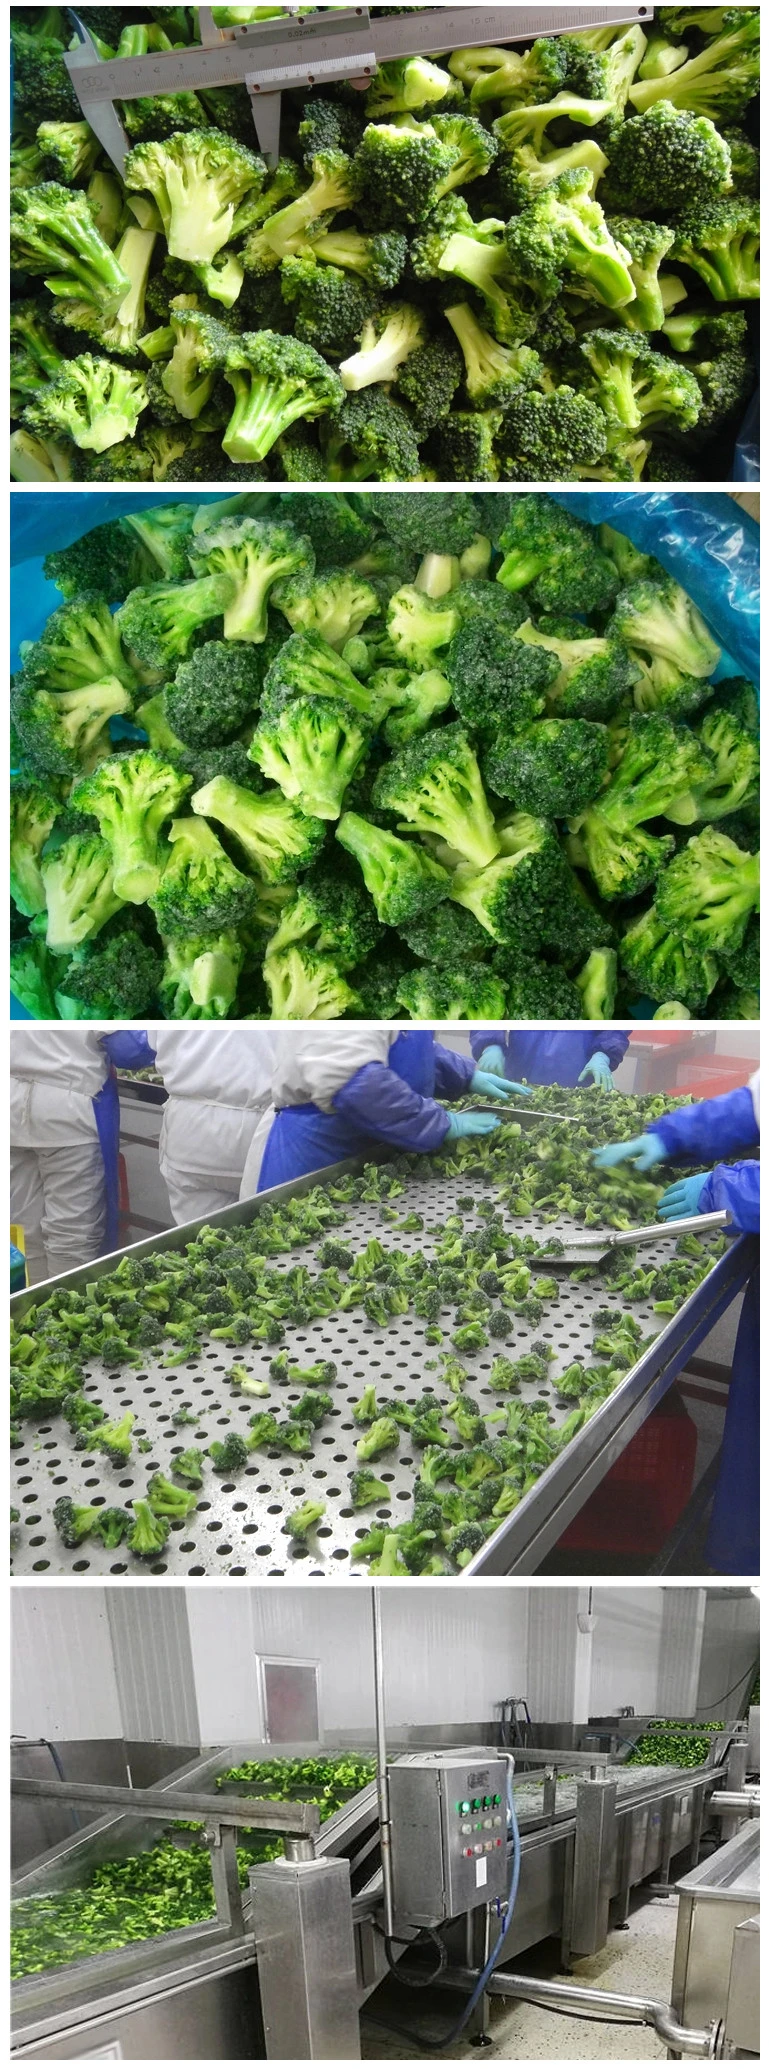 Frozen Broccoli Frozen High Quality Cheap Custom Quick Delivery Best Price Frozen Broccoli